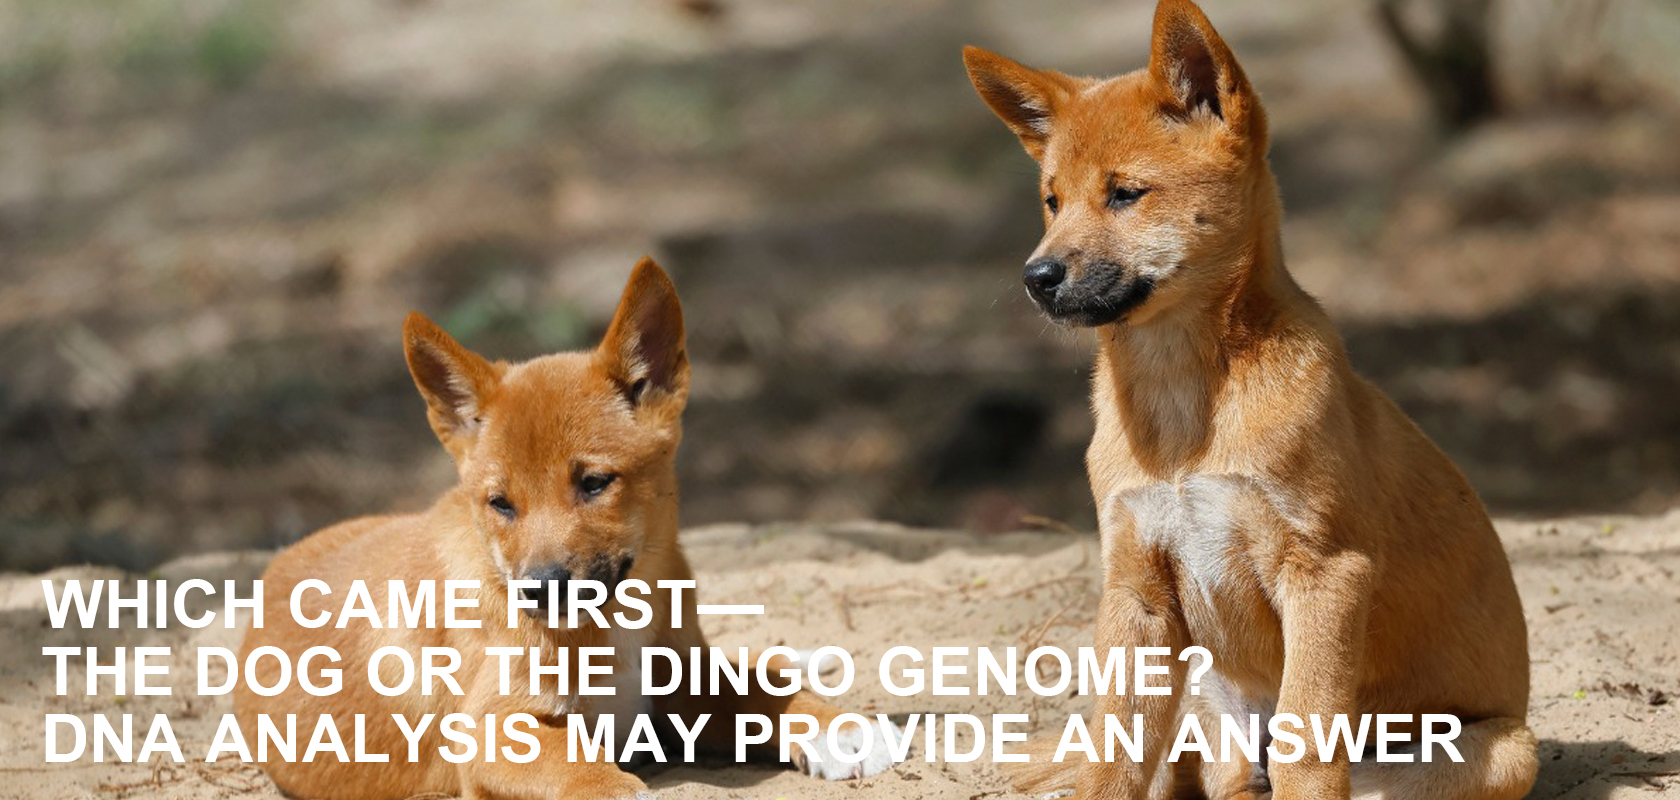 WHICH CAME FIRST—THE DOG OR THE DINGO GENOME? DNA ANALYSIS MAY PROVIDE AN ANSWER